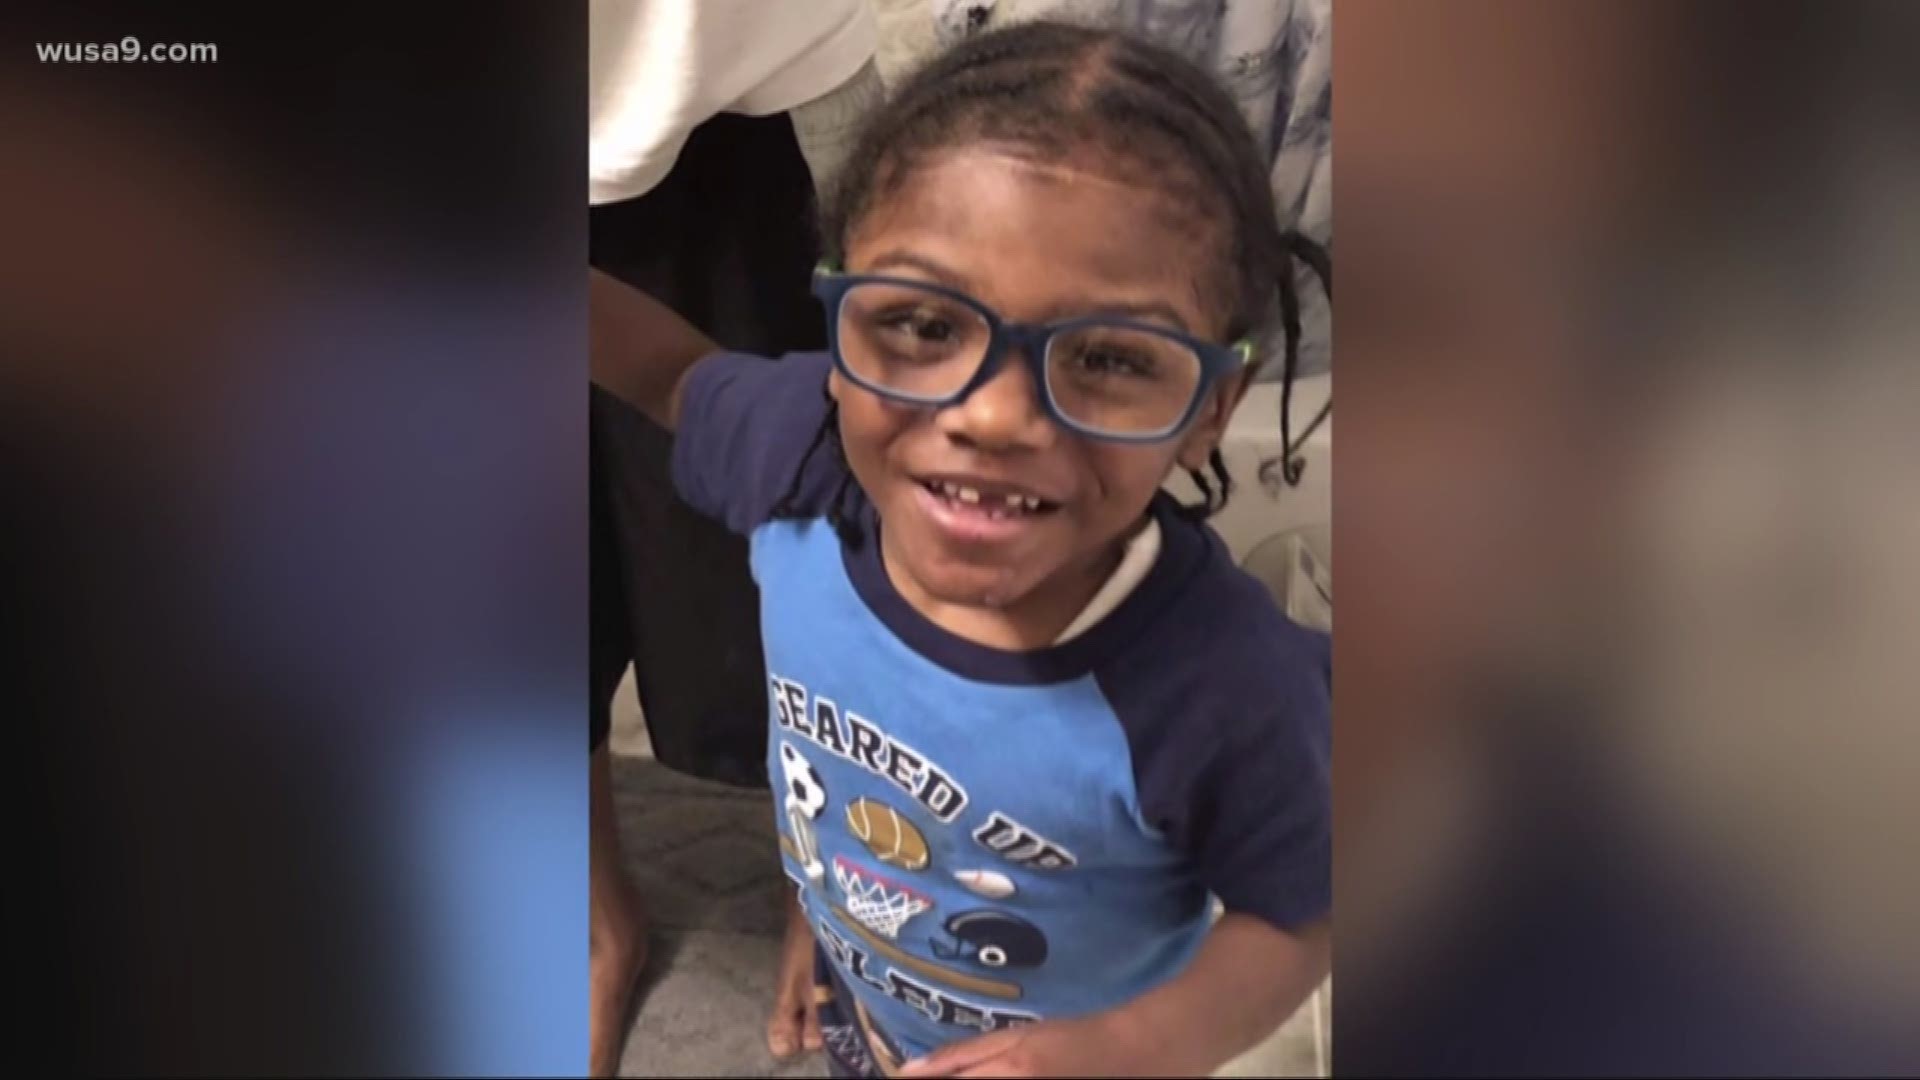 Four-year-old Malachi Lawson was reported missing in Baltimore on Friday night. But Lawson's mother told police that he was never missing, but is dead, police say. Police said the mother subsequently gave detectives the location of Malachi's remains.

Police said his body was found in a dumpster. An autopsy will be performed to determine his cause of death.